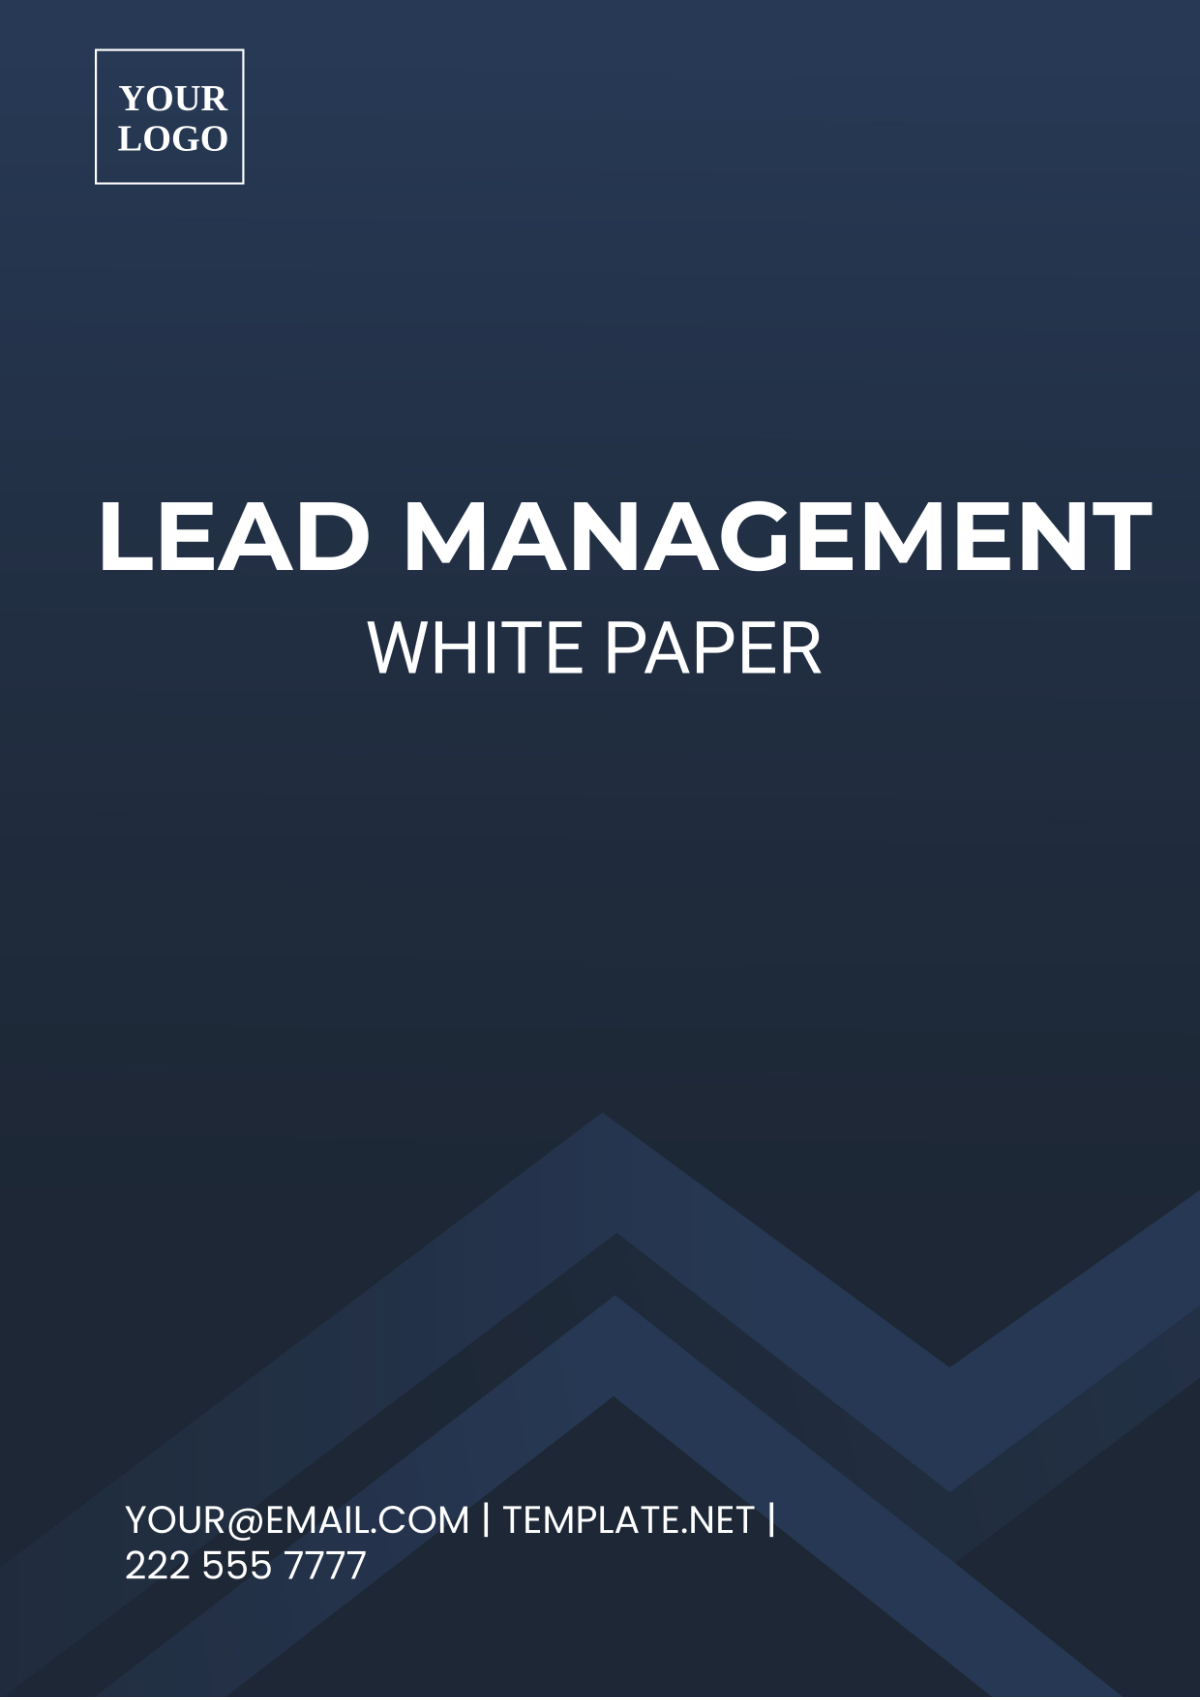 Lead Management White Paper Template